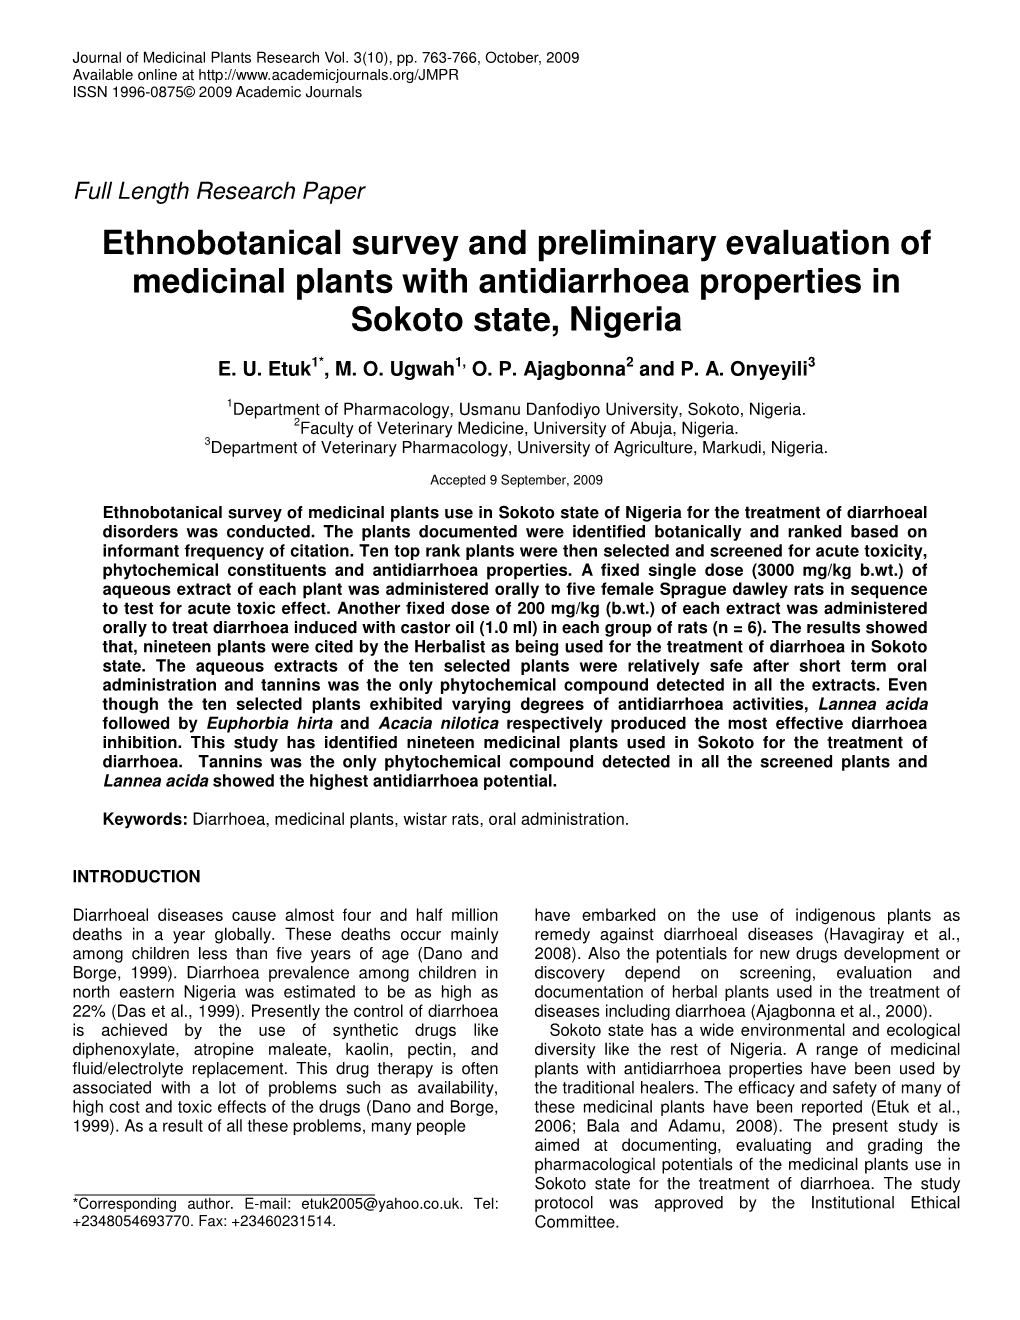 Ethnobotanical Survey and Preliminary Evaluation of Medicinal Plants with Antidiarrhoea Properties in Sokoto State, Nigeria